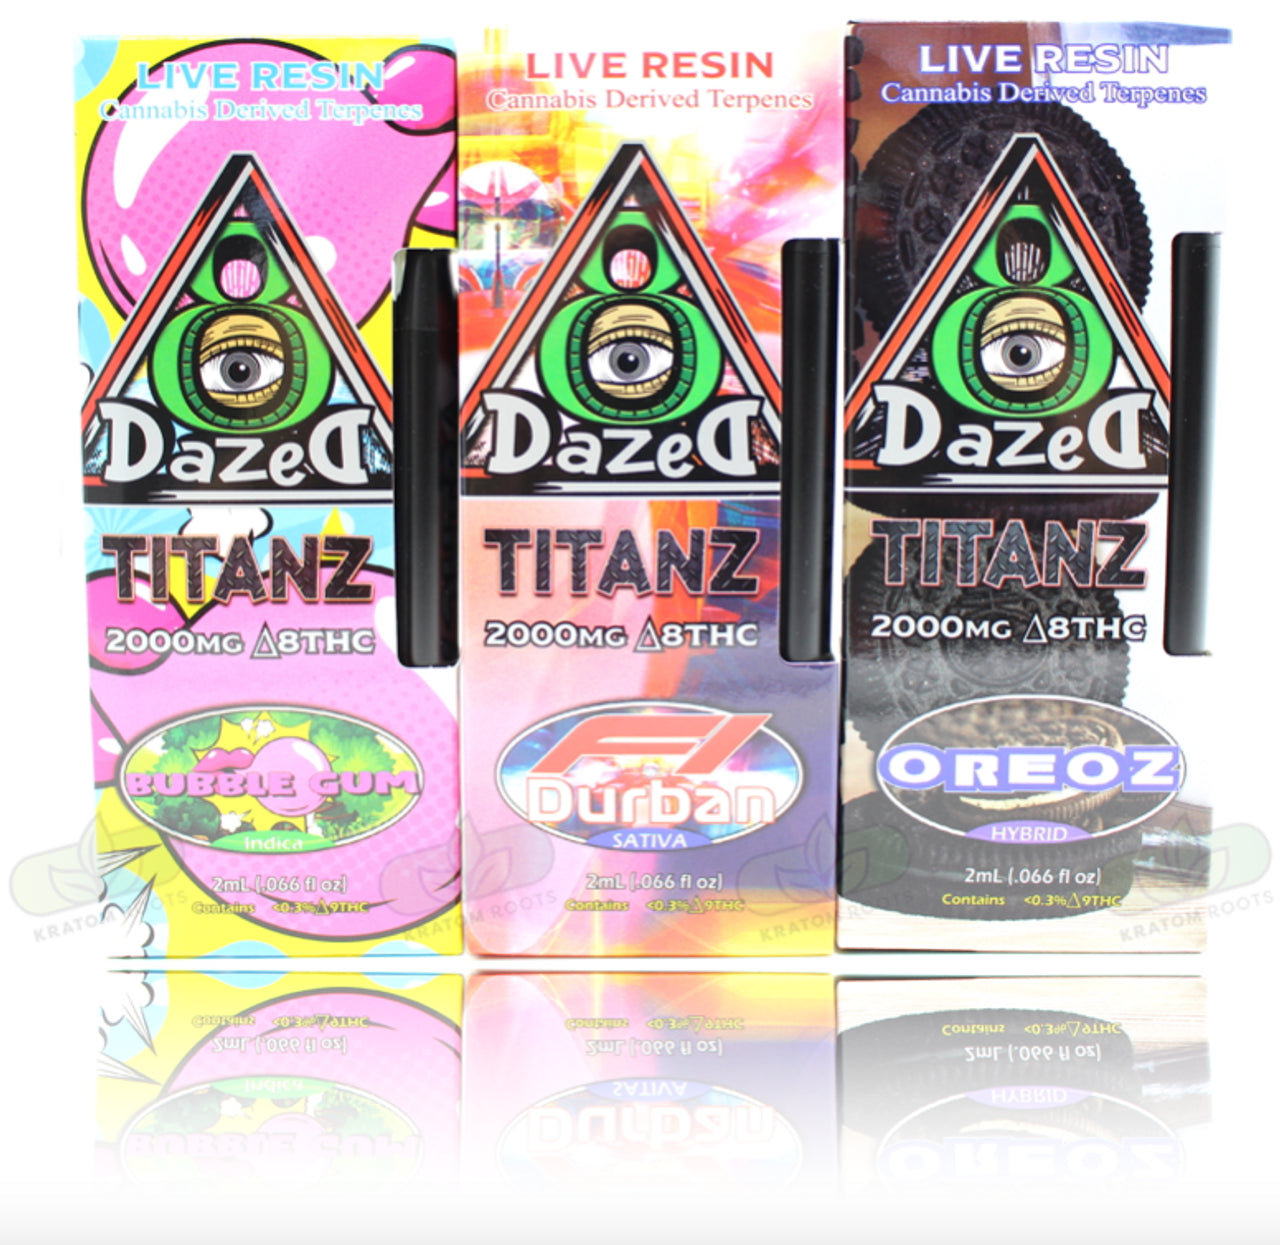 Dazed - TITANZ Delta 8 Live Resin Disposable ( 2000MG / Display of 5 )